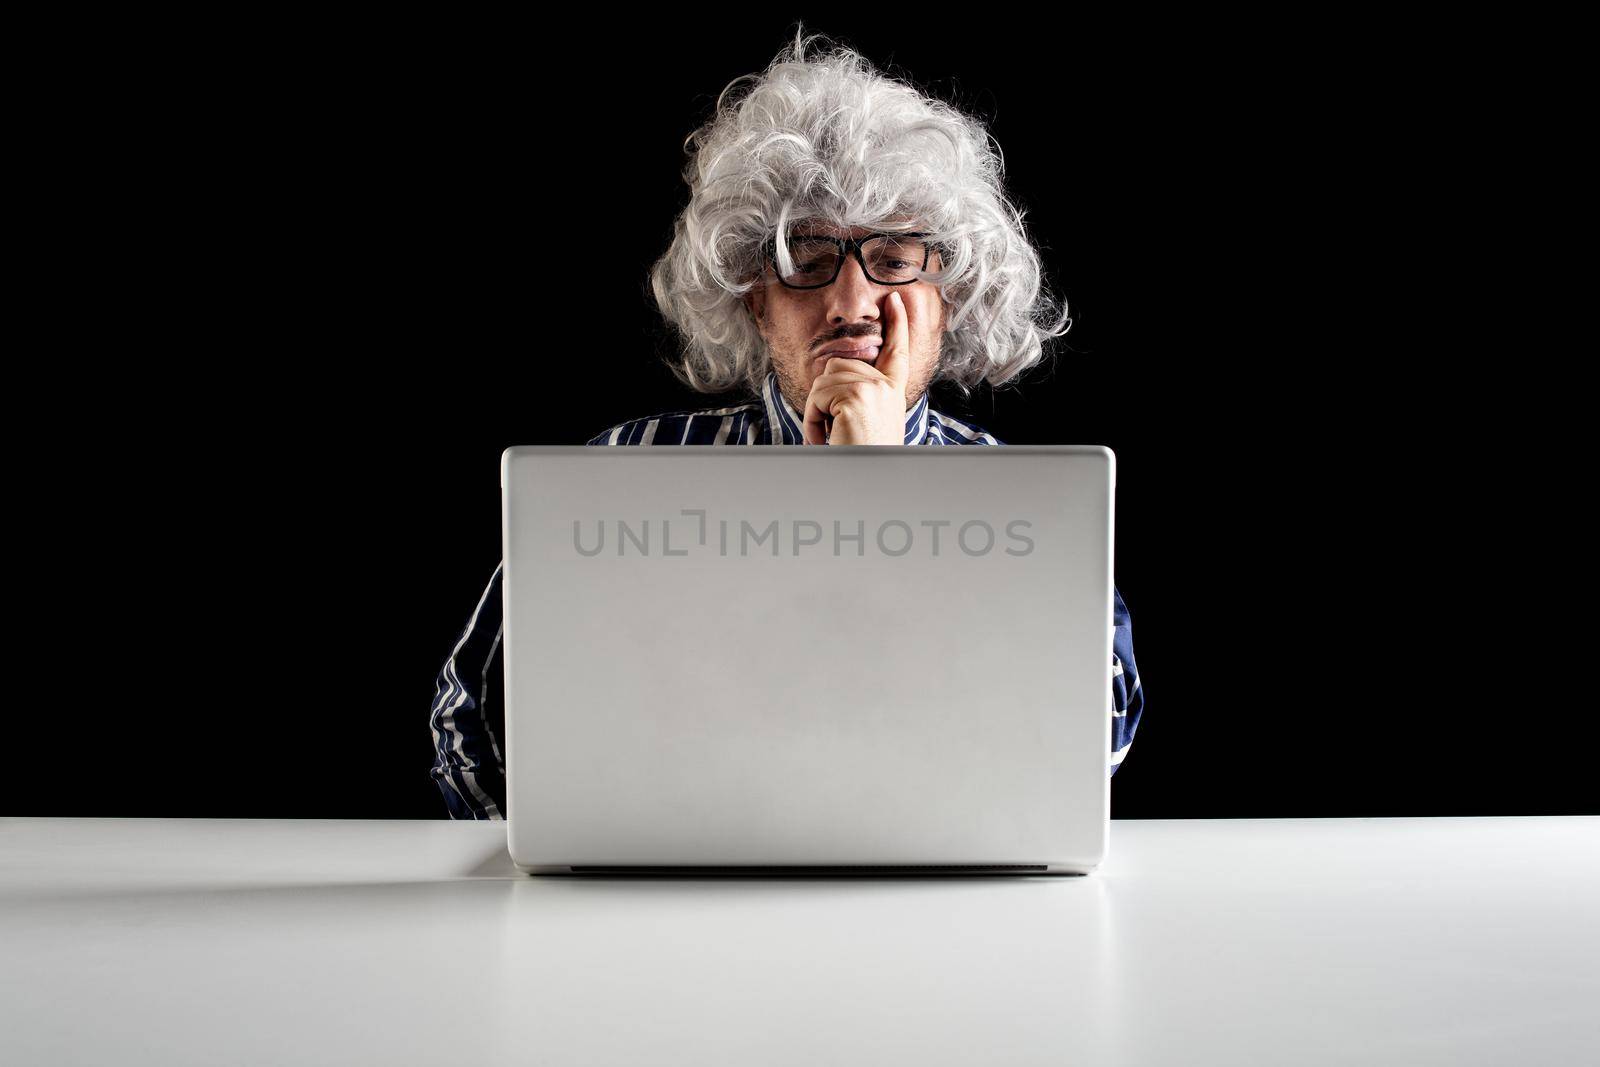 An elder serious man lost in thoughts in front of a laptop computer, focused boomer or absent-minded thinking of problem solution, worried puzzled senior pondering question at work